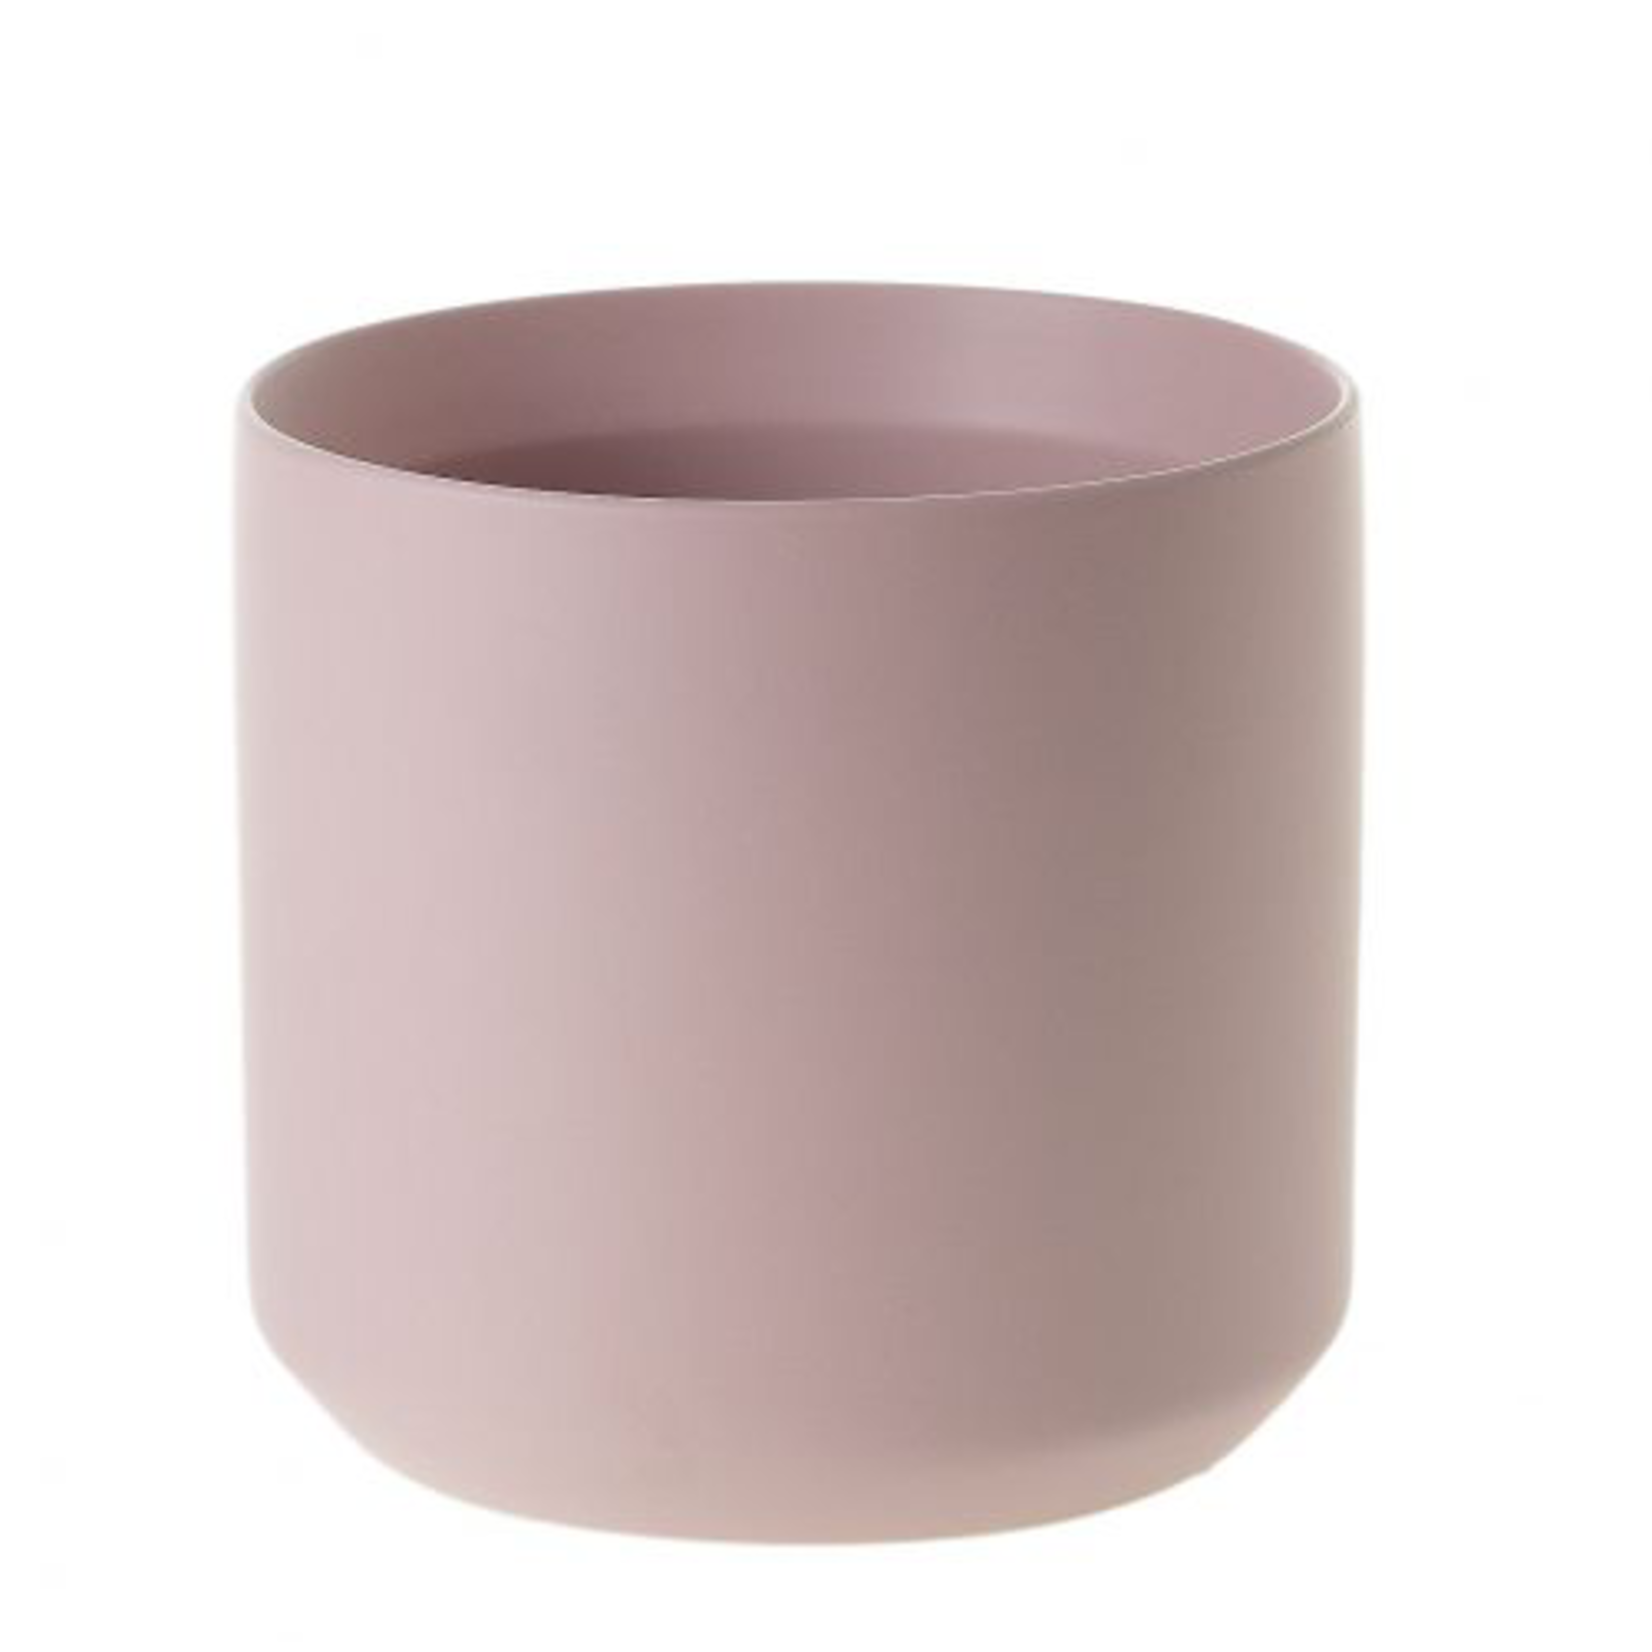 6.75”H X 7” PINK  KENDALL POT COLLECTION (AD)